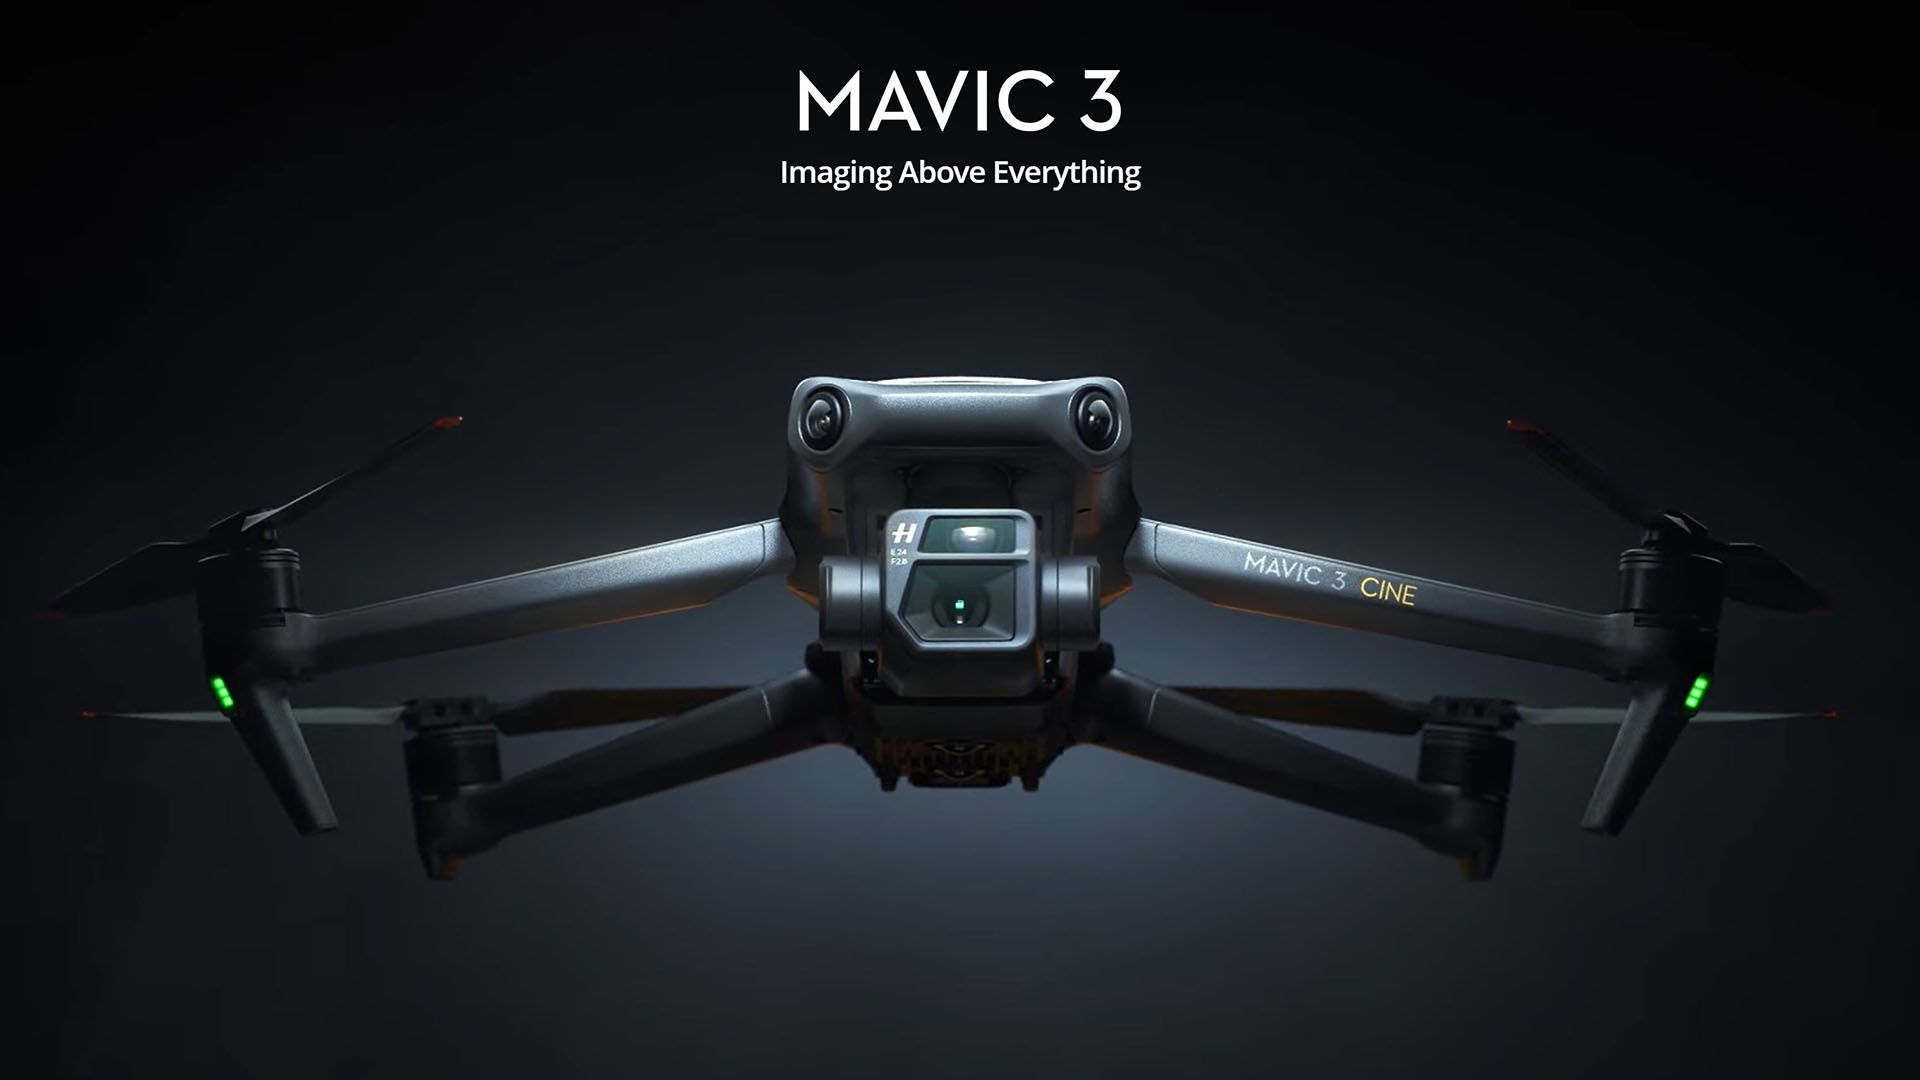 DJI Mavic 3 Pro - It's ALL About The Cameras!